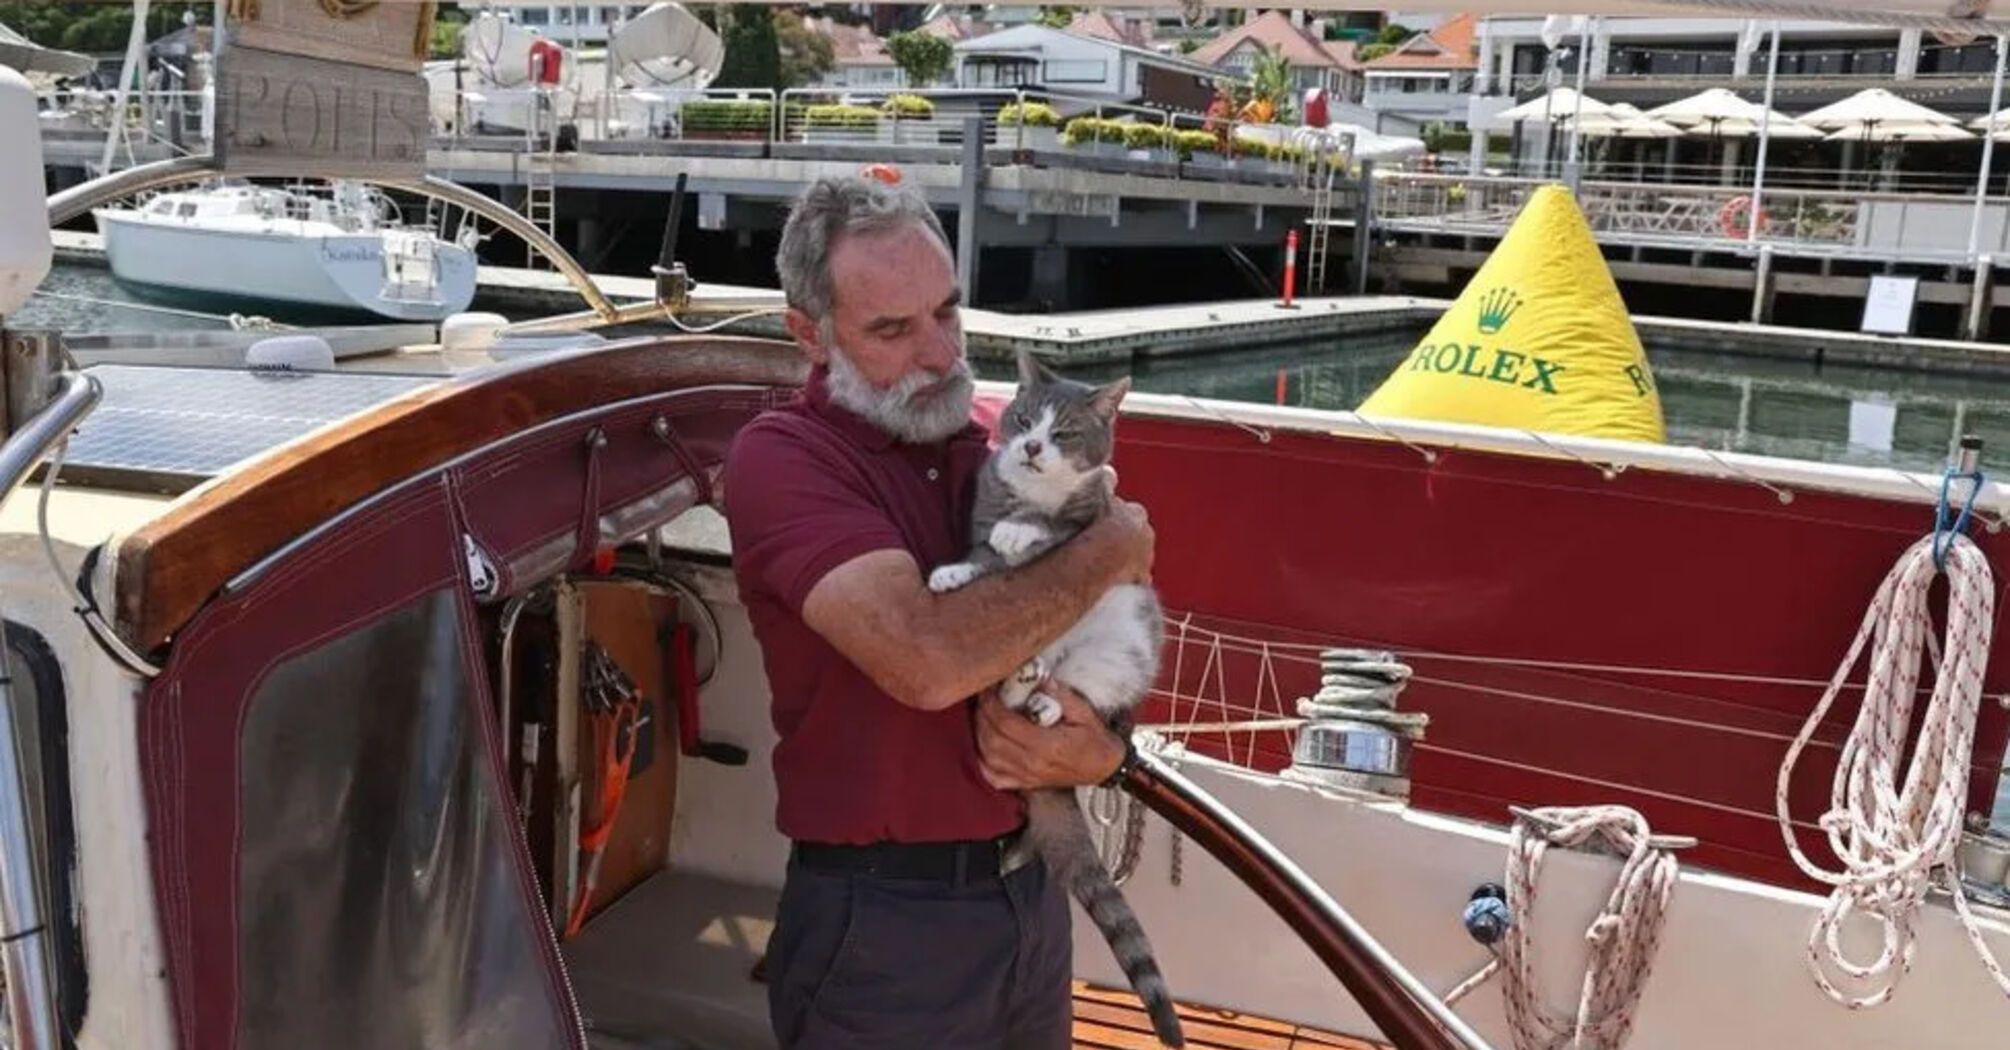 An unusual participant will take part in the yacht race